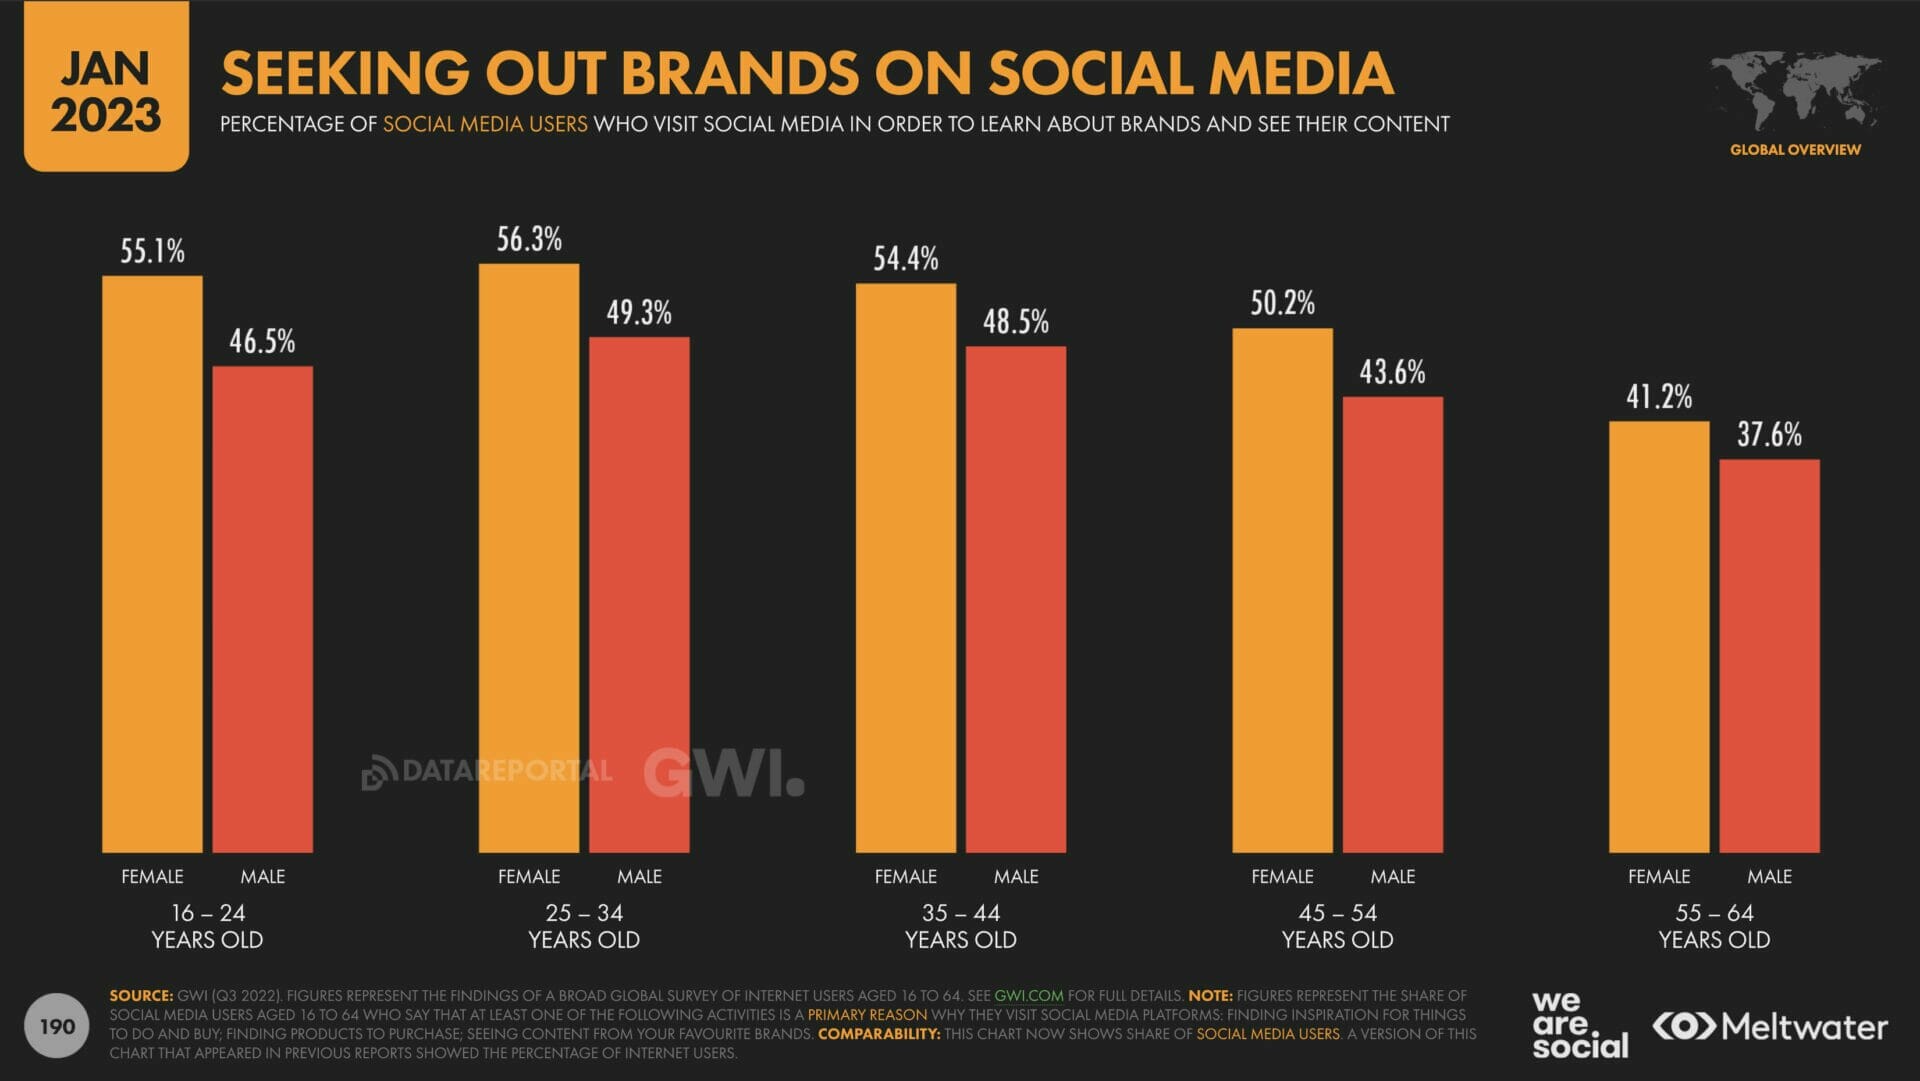 audience age demographics that search out brands on social media